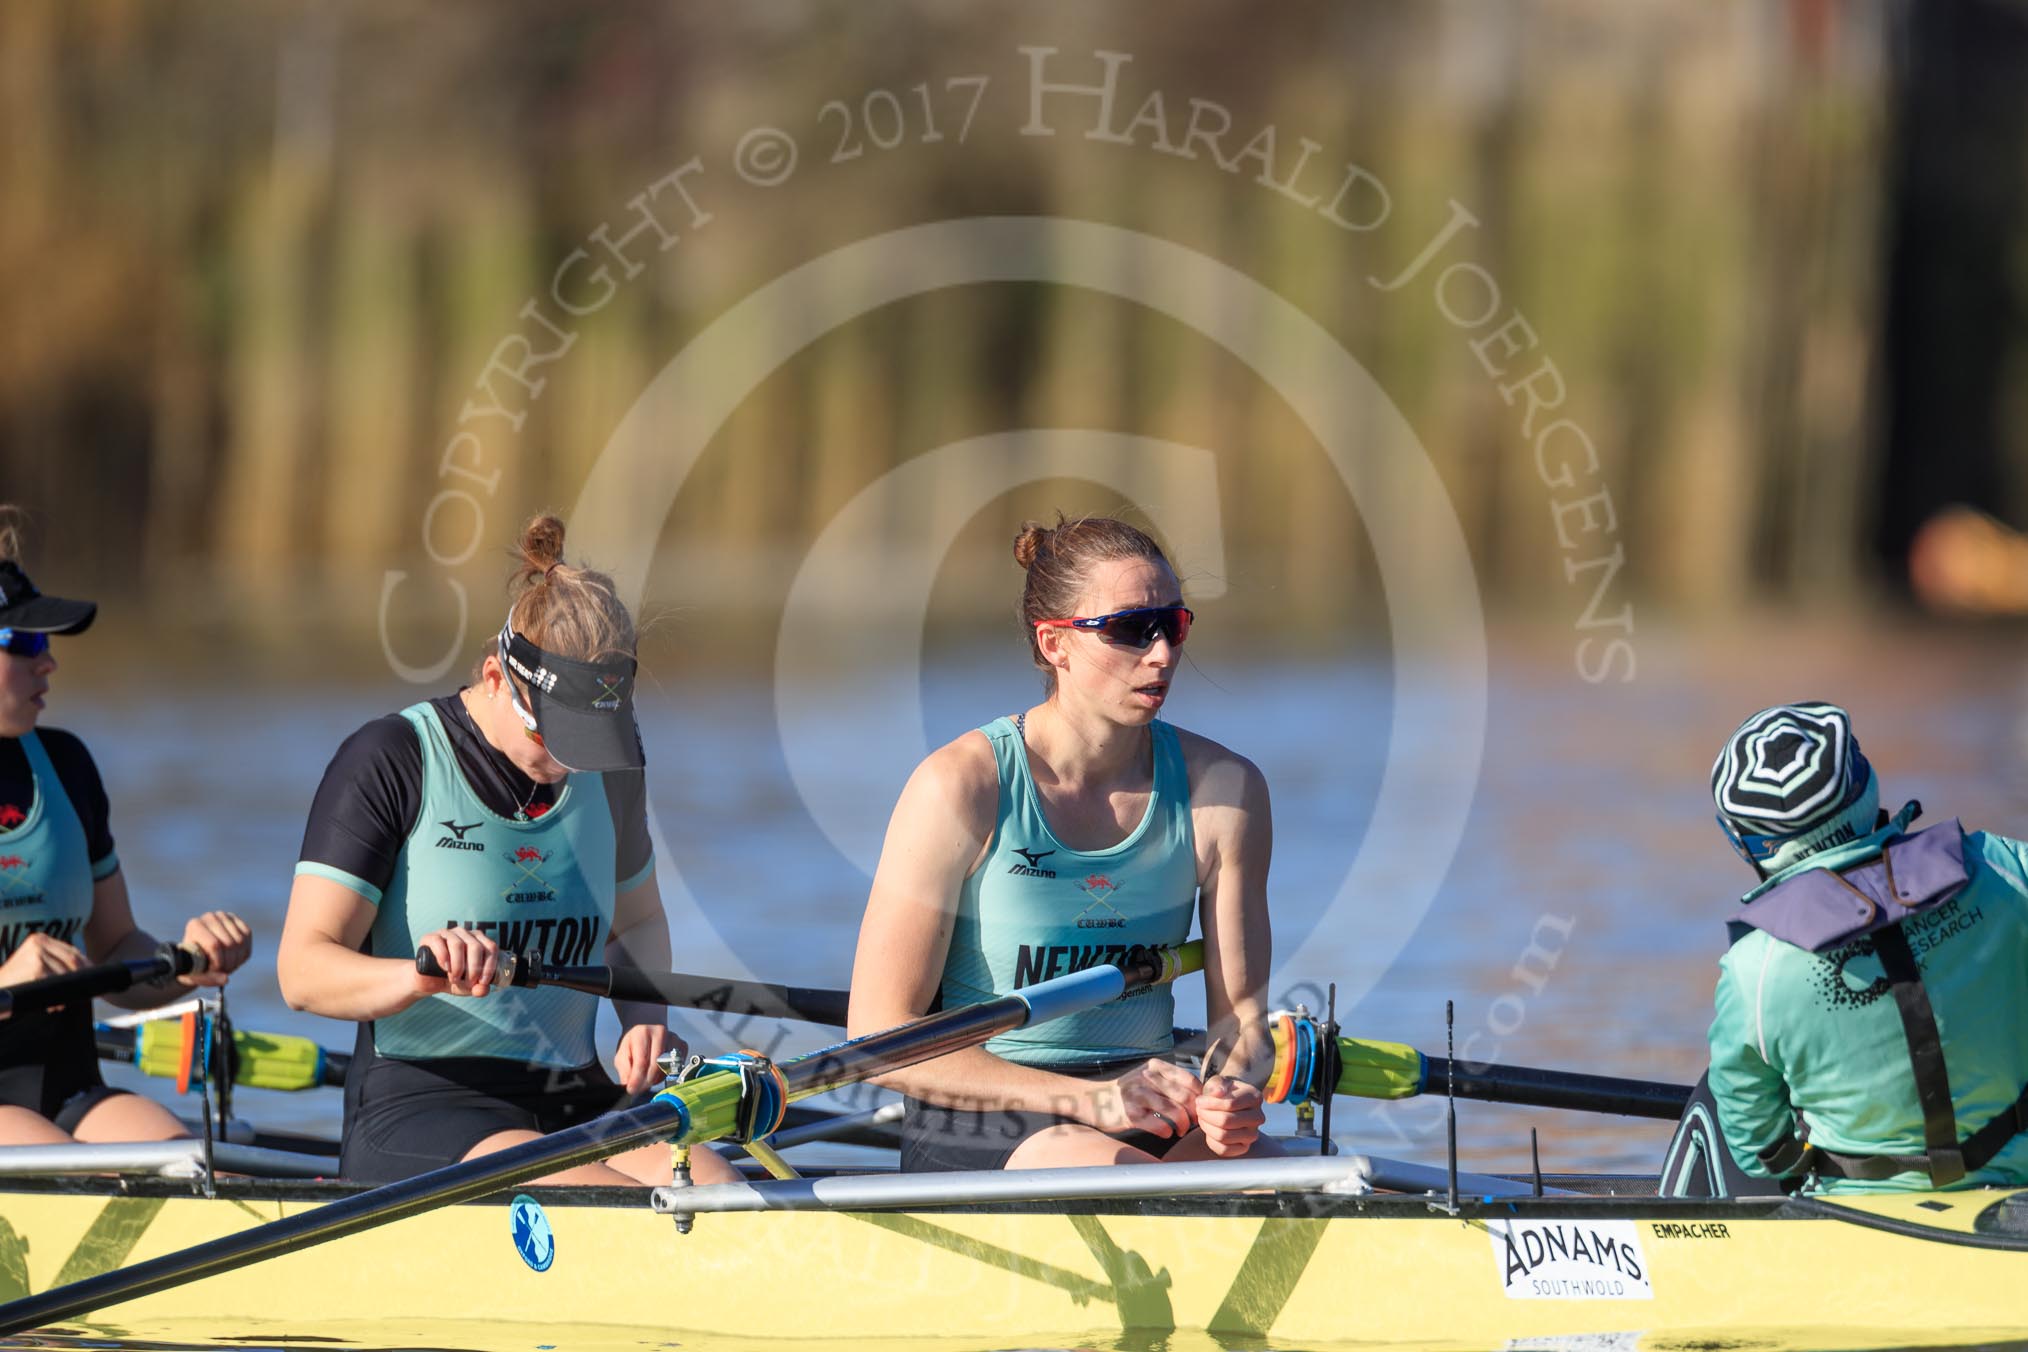 The Women's Boat Race season 2018 - fixture CUWBC vs. ULBC: CUWBC getting ready for the race - 6 Anne Beenken, 7 Imogen Grant, stroke Tricia Smith, cox Sophie Shapter.
River Thames between Putney Bridge and Mortlake,
London SW15,

United Kingdom,
on 17 February 2018 at 13:06, image #31